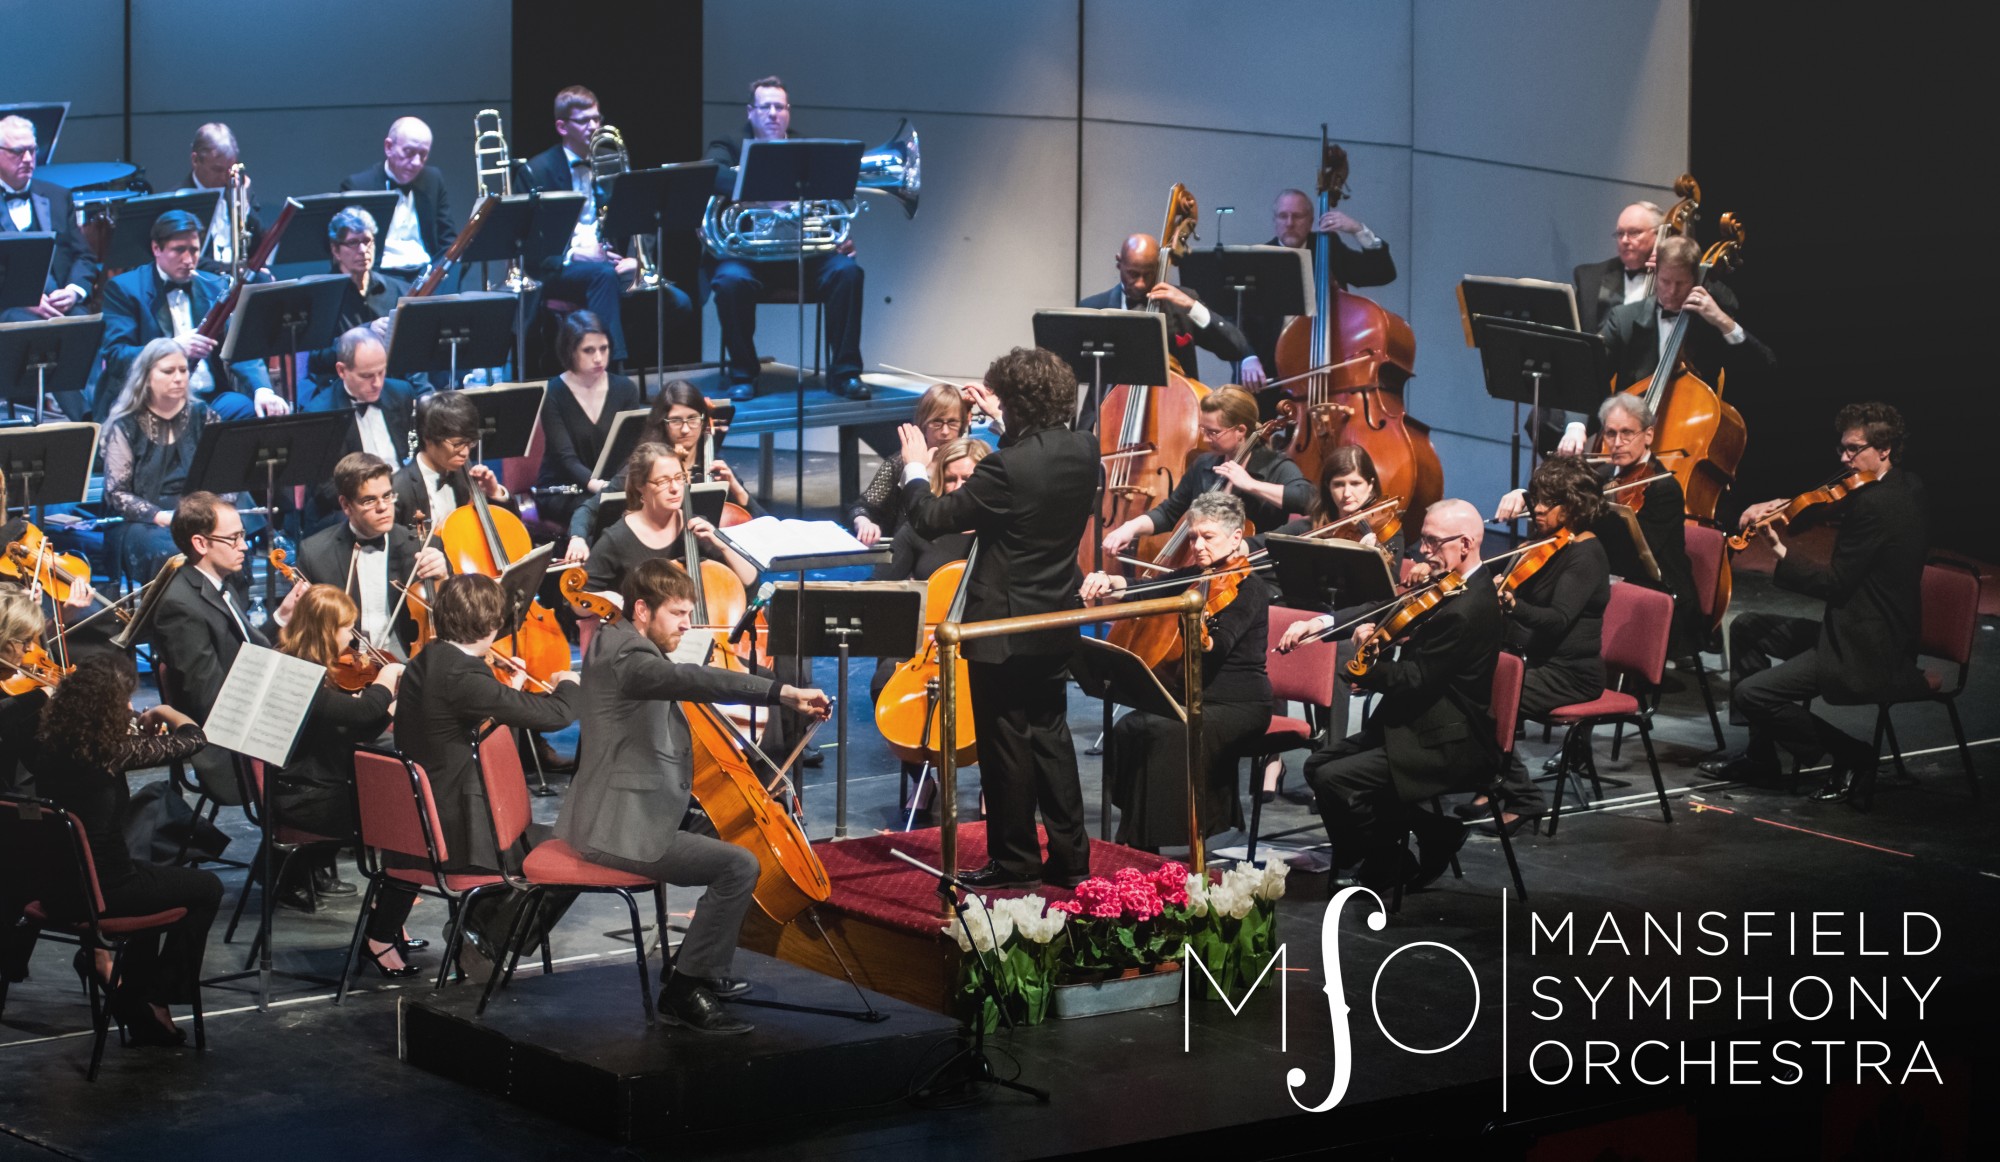 Mansfield Symphony Orchestra